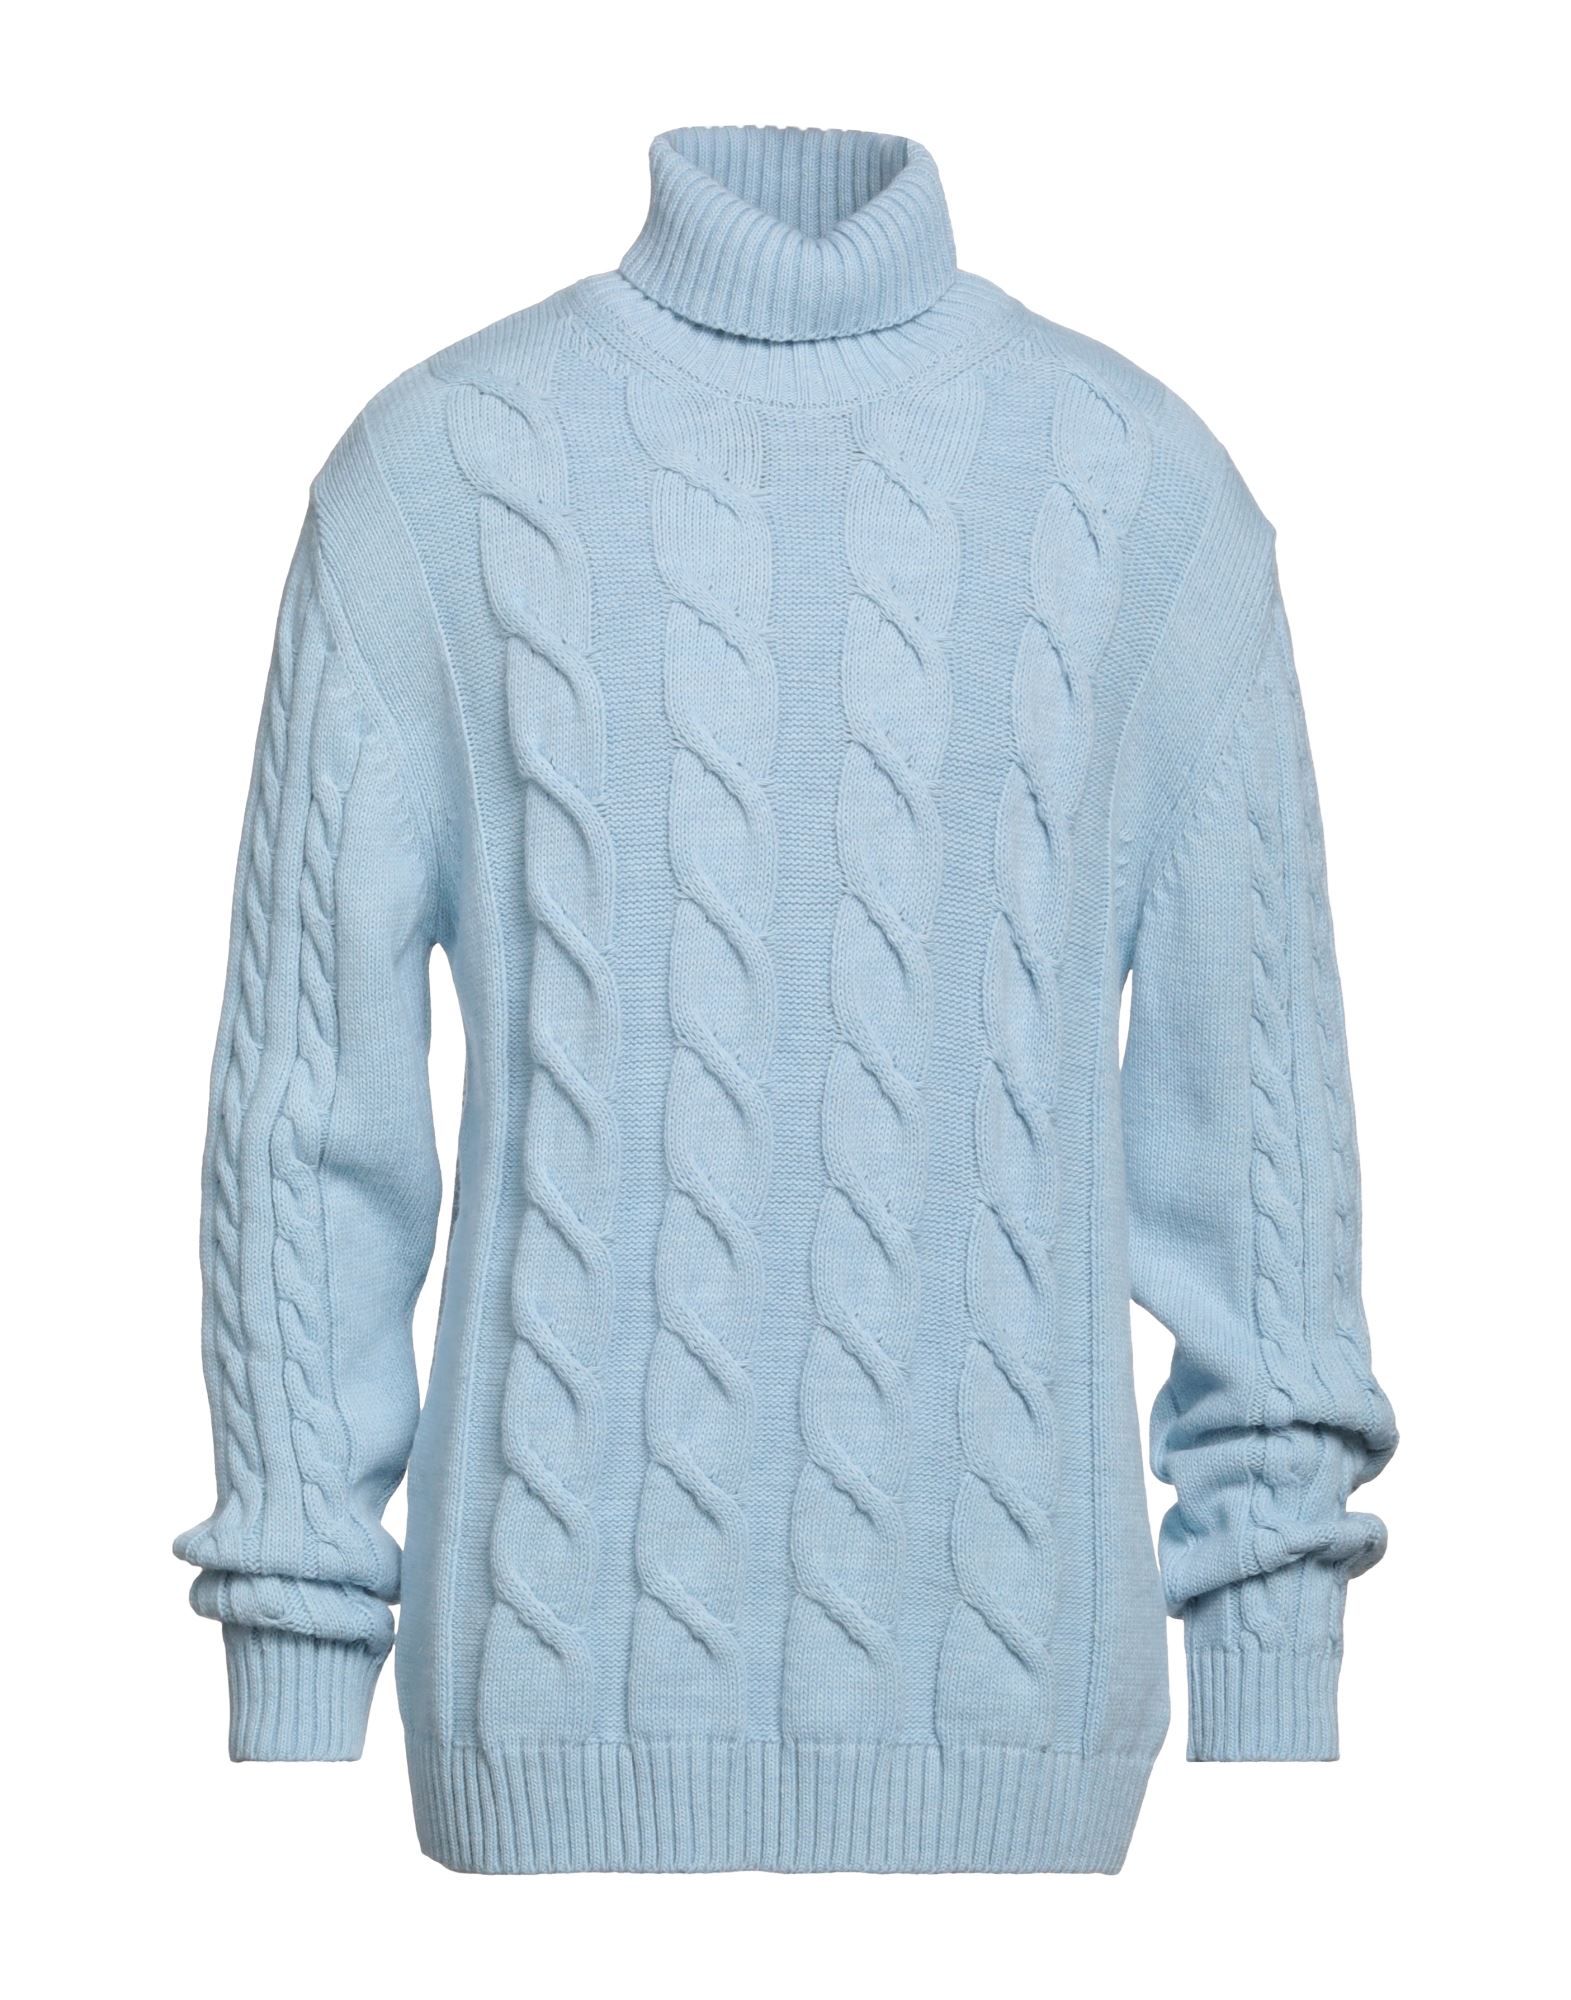 FAMILY FIRST MILANO FAMILY FIRST MILANO MAN TURTLENECK SKY BLUE SIZE XL WOOL, POLYAMIDE, ACRYLIC